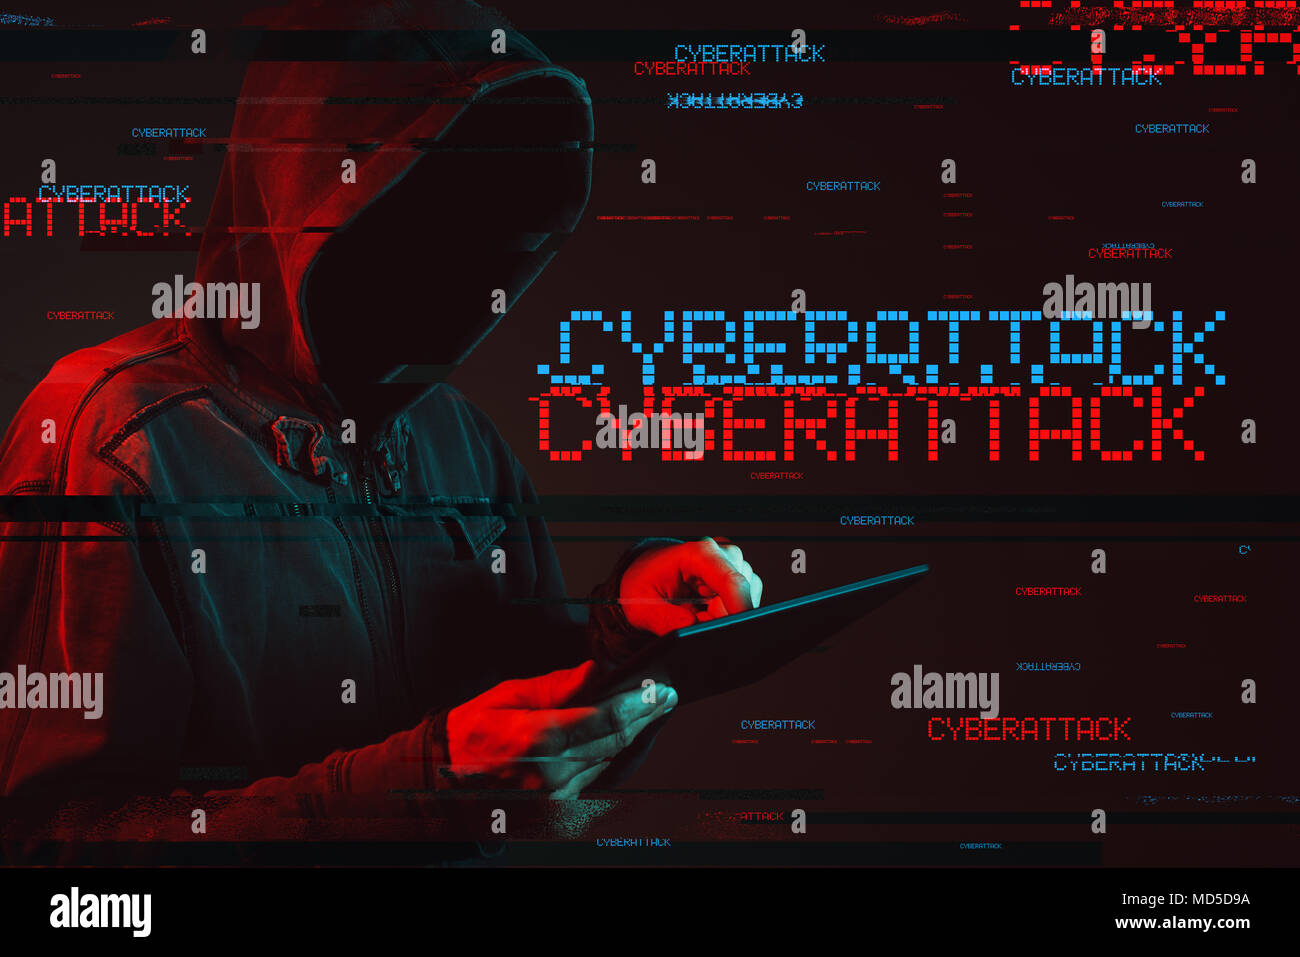 Cyberattack concept with faceless hooded male person using tablet computer, low key red and blue lit image and digital glitch effect Stock Photo